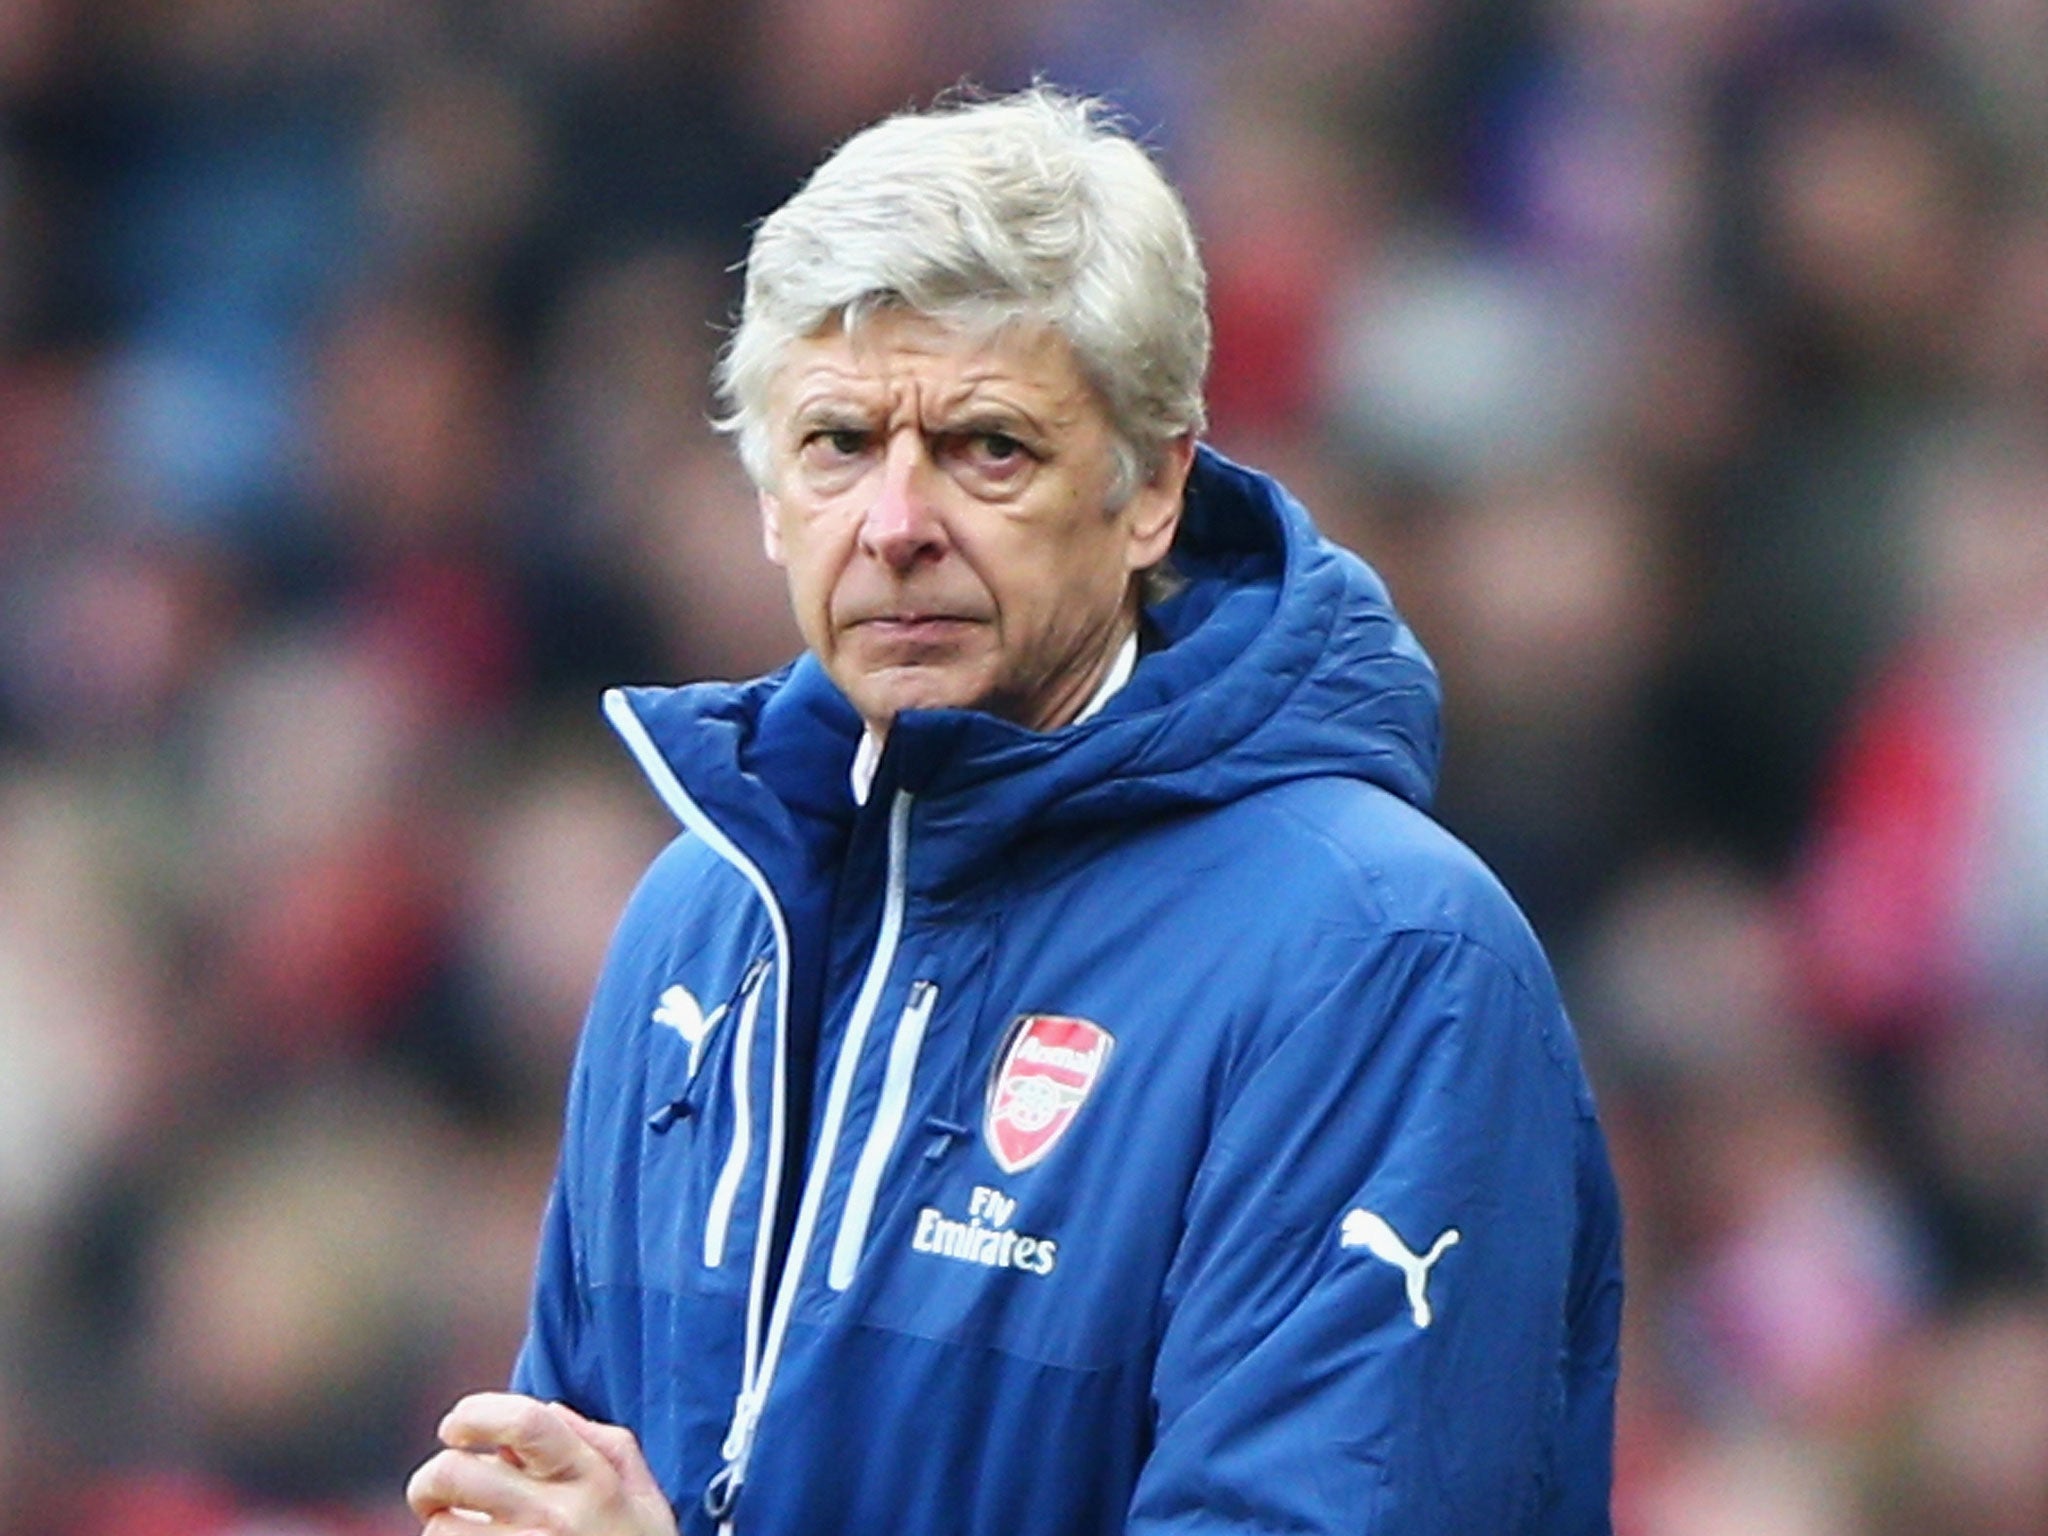 Arsène Wenger said Arsenal lacked patience in the first-leg home defeat against Monaco